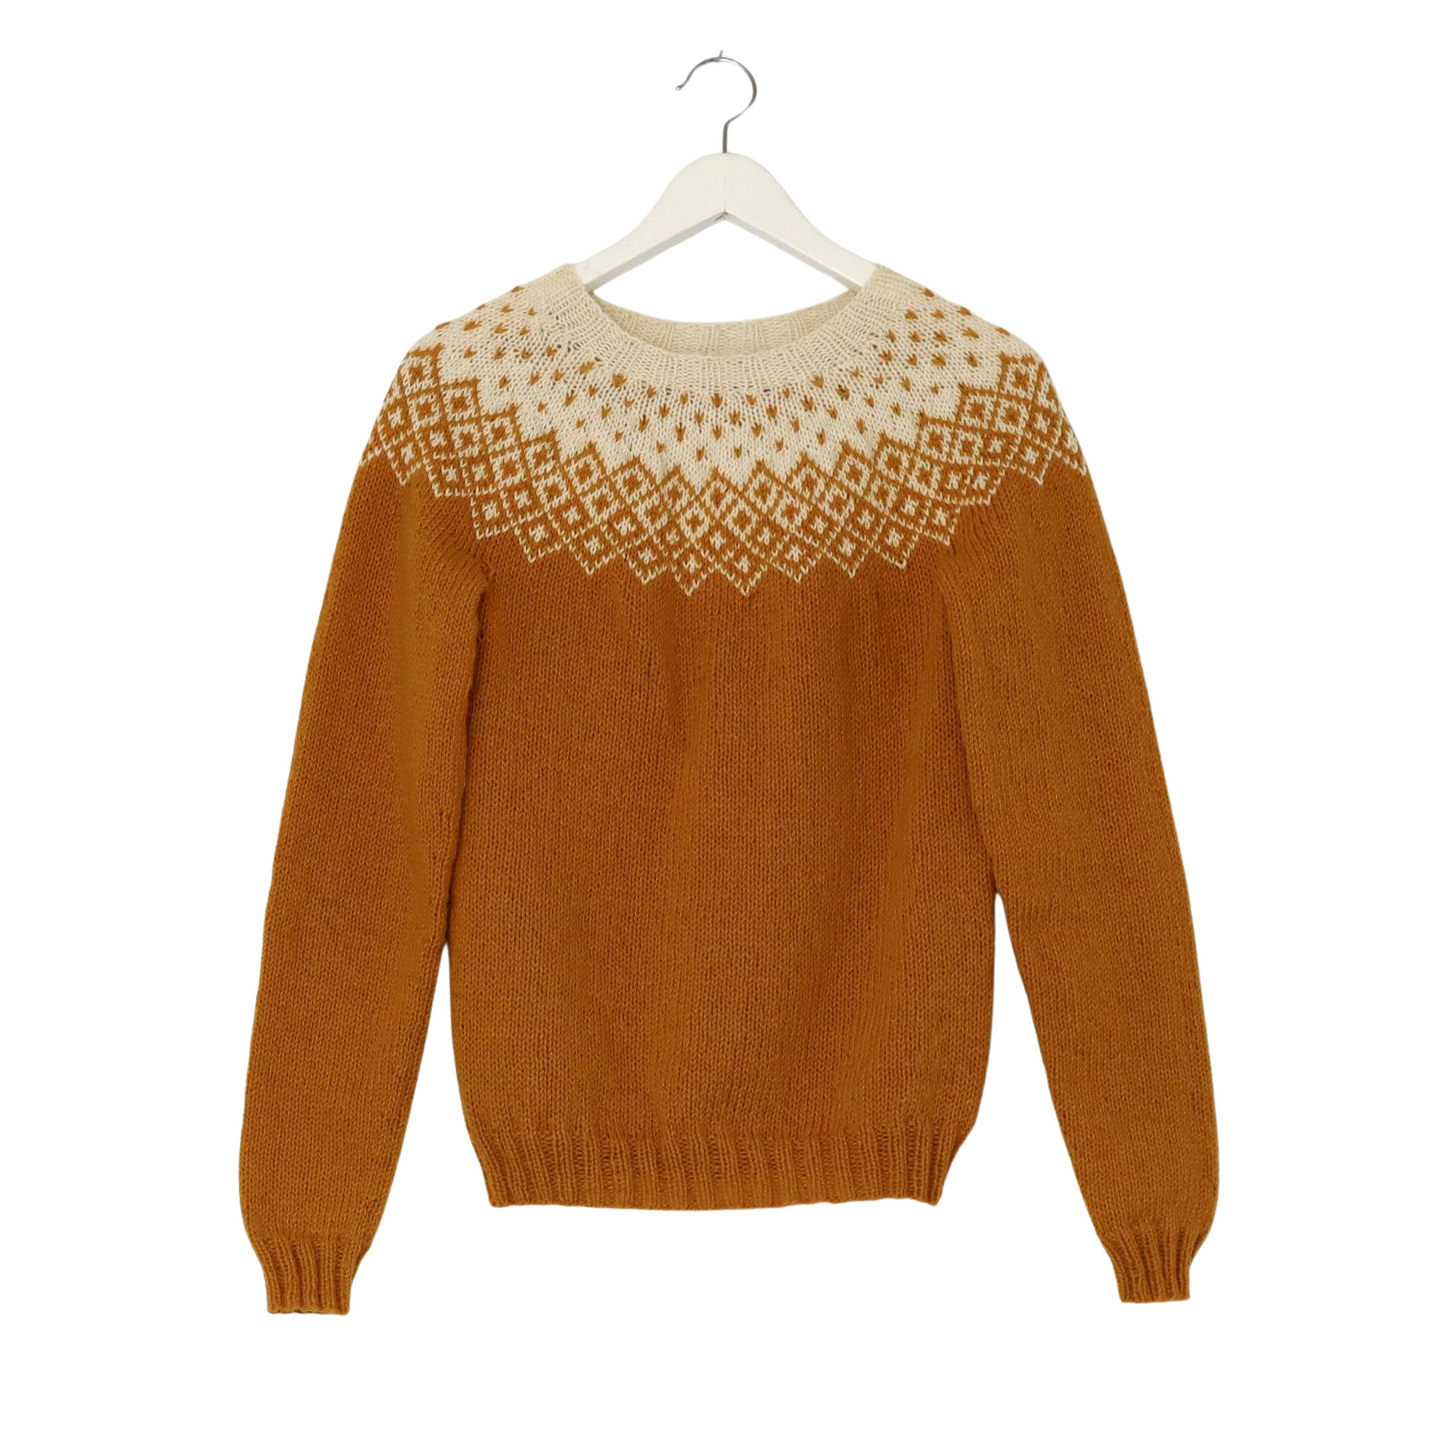 Stay Warm and Stylish with this Hand-Knitted Bohéme Wool Sweater for Women